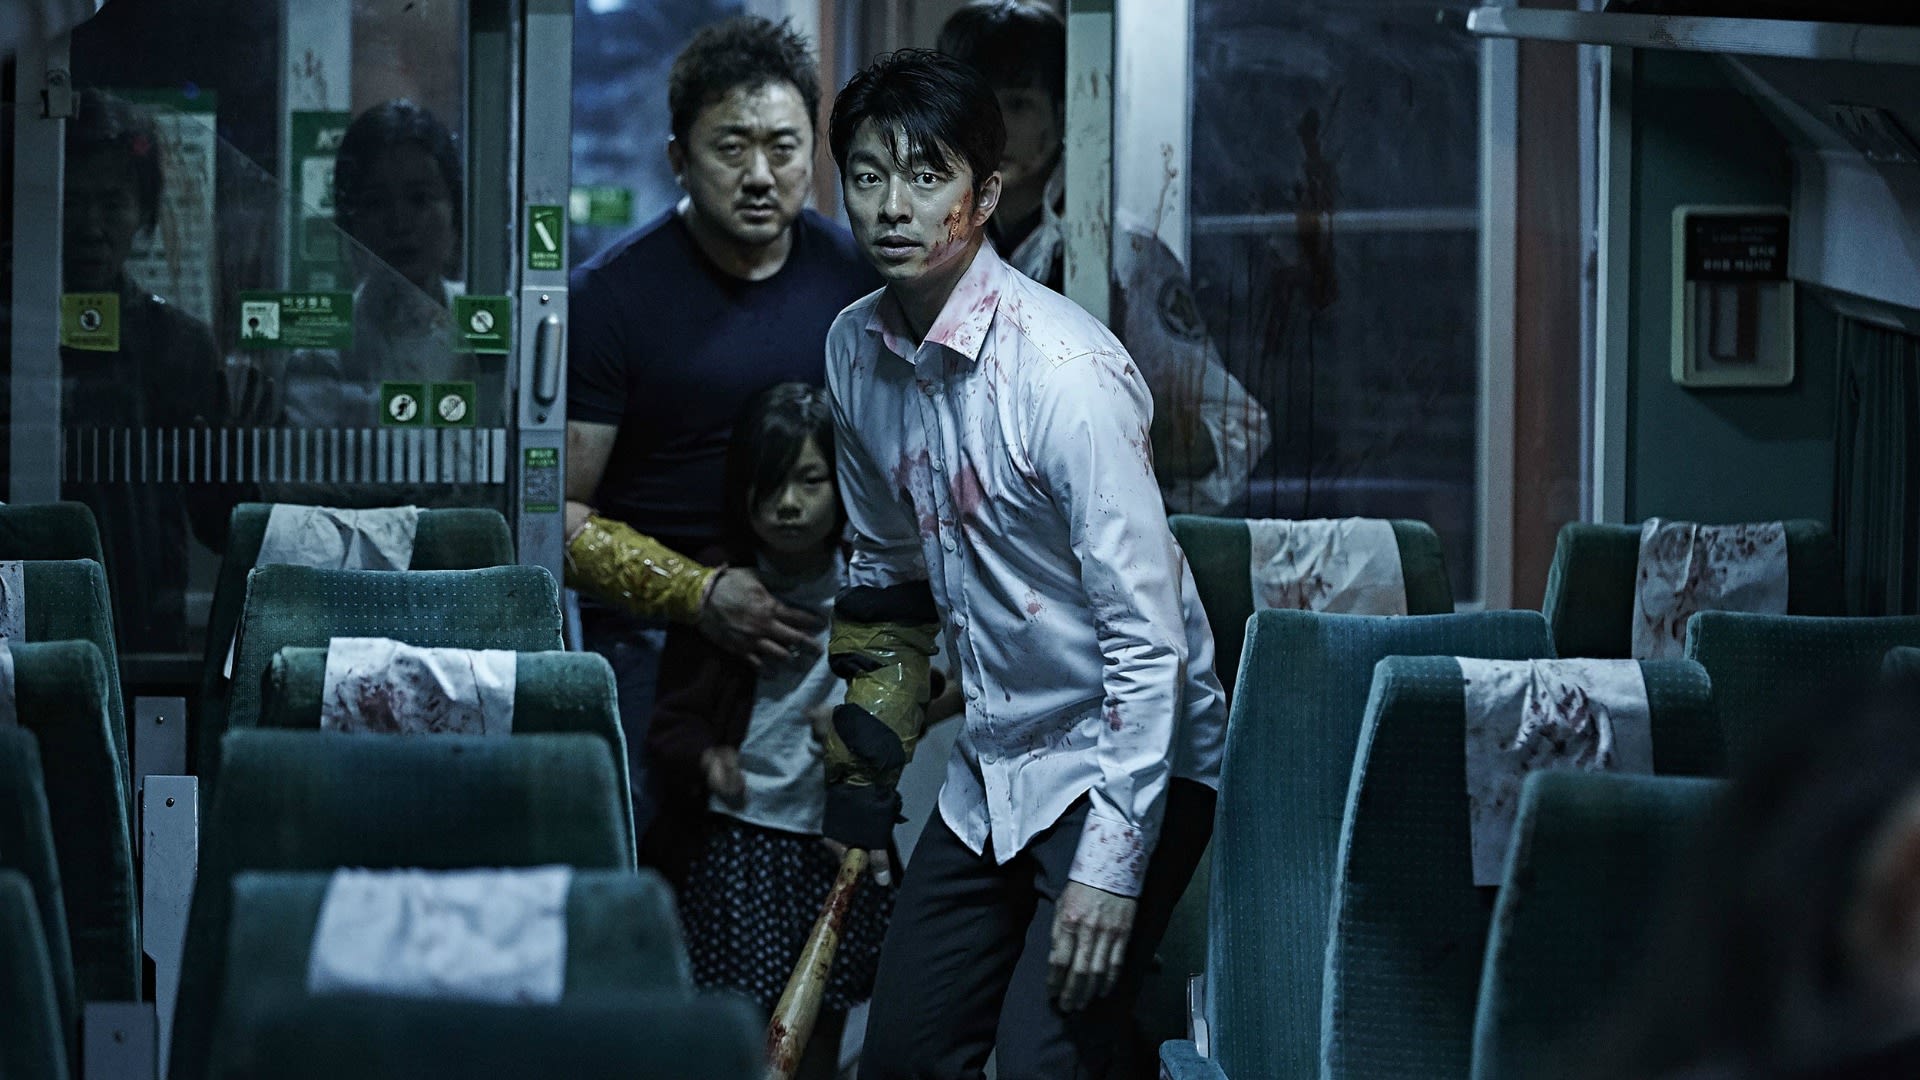 This South Korean Zombie Movie Restored Quentin Tarantino's Faith in the Undead